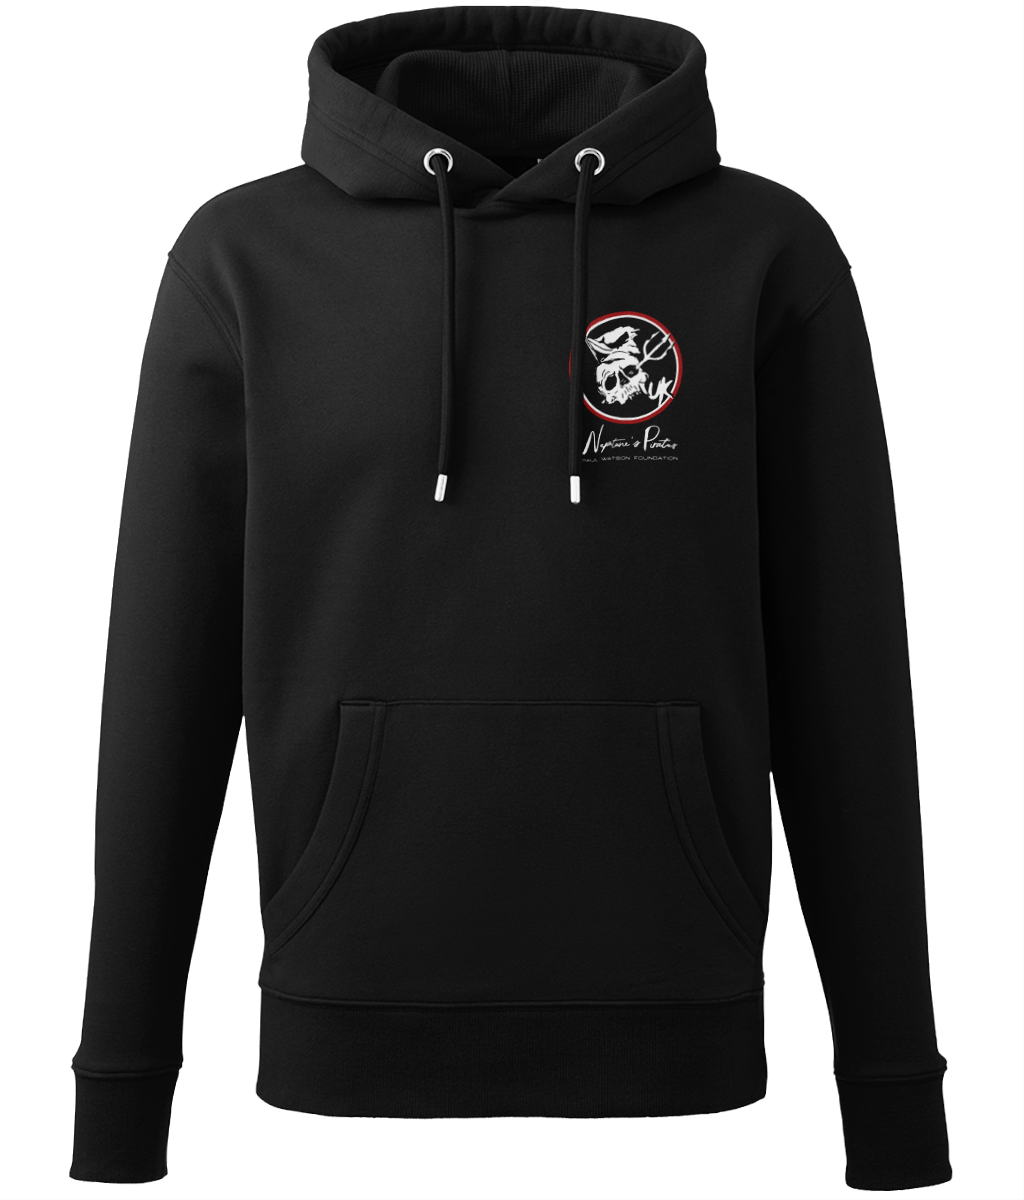 Neptune's Pirates Unisex Pullover Hoodie - Captain Paul Watson Foundation (t/a Neptune's Pirates)